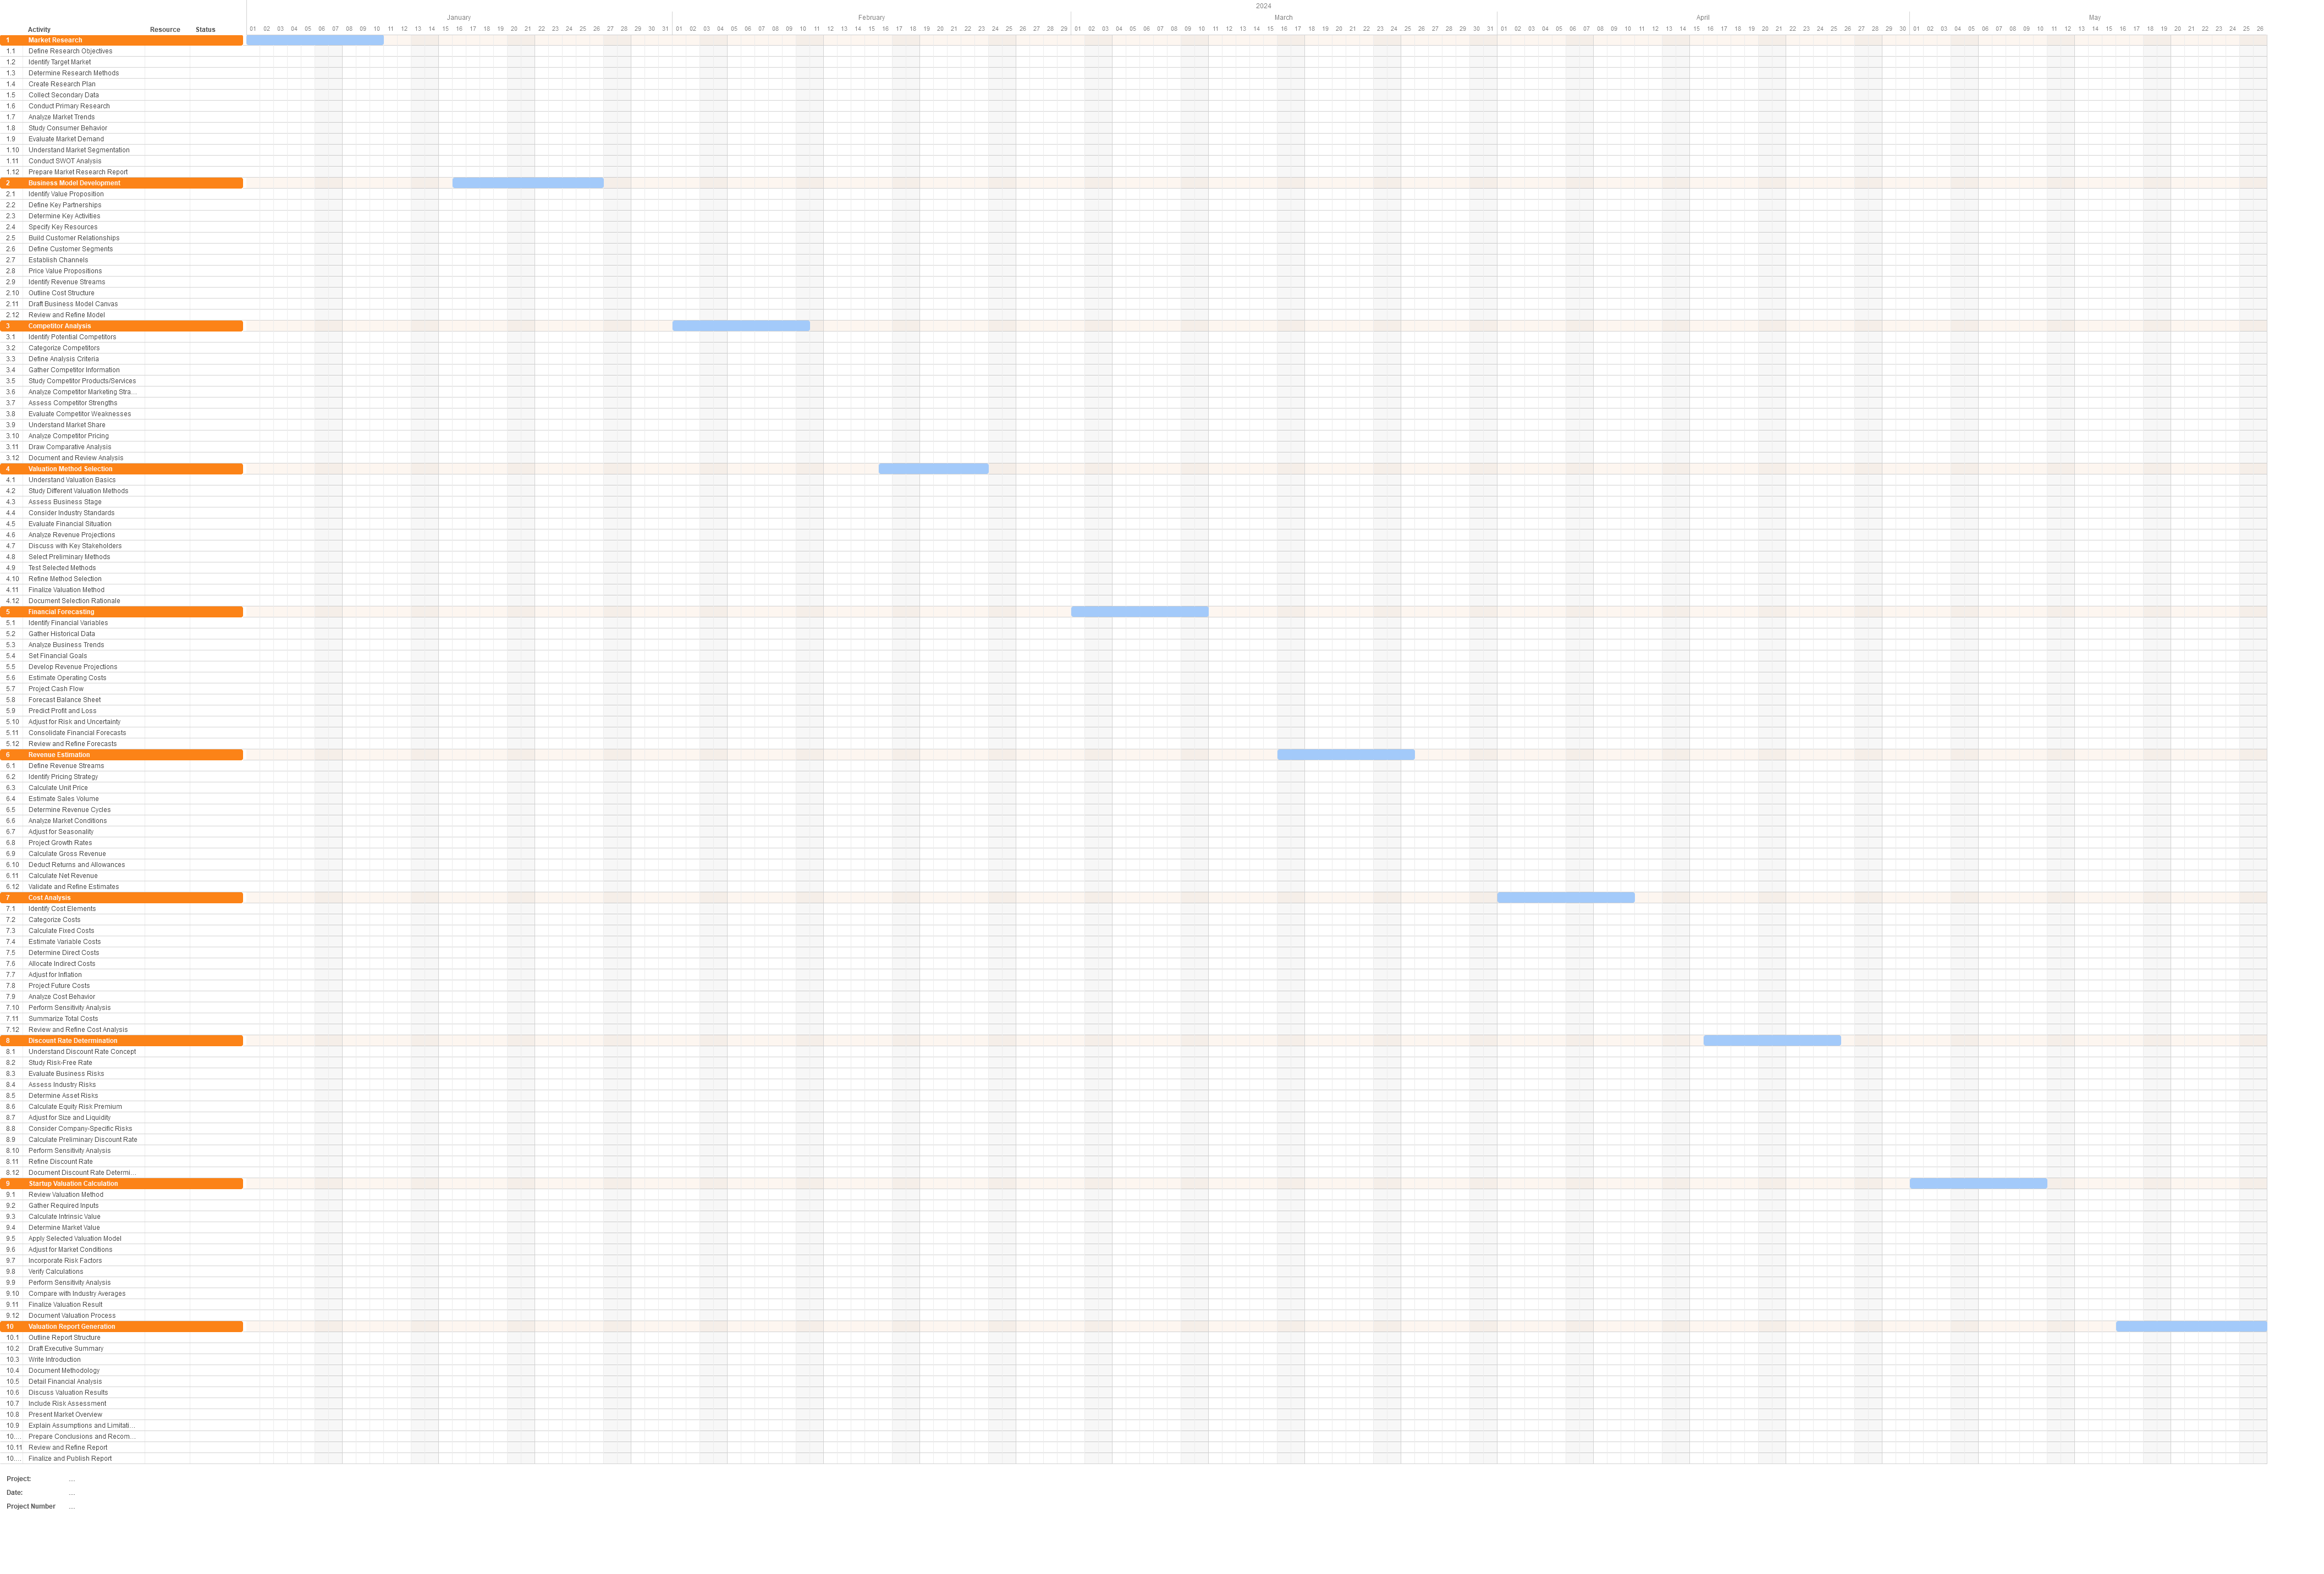 Gantt chart for a Startup Valuation project